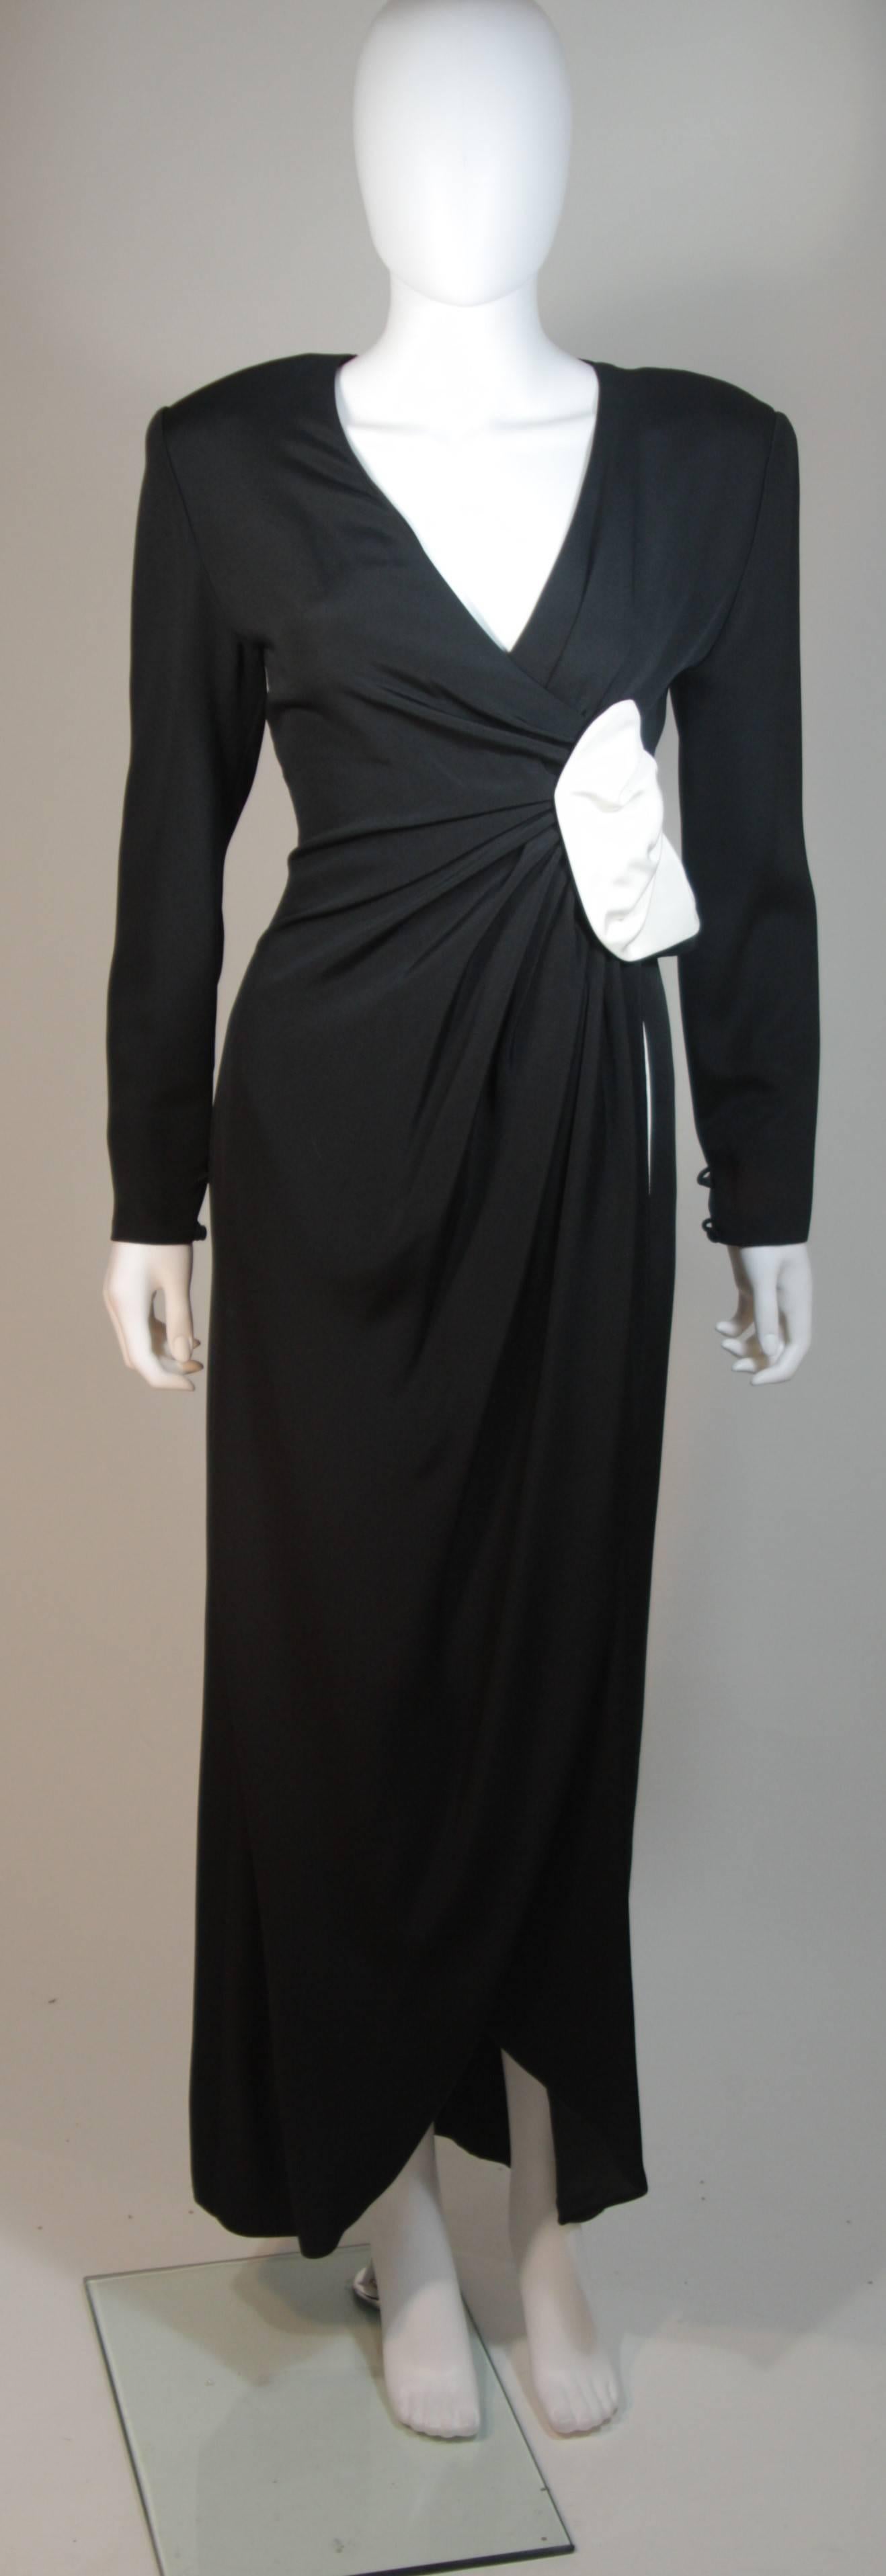 This Nolan Miller  gown is composed of black and white silk. The drape detail is accentuated by the striking contrast. The draped design contours the waist in a lovely way. There is a center back zipper closure. Circa 1980's.  In excellent